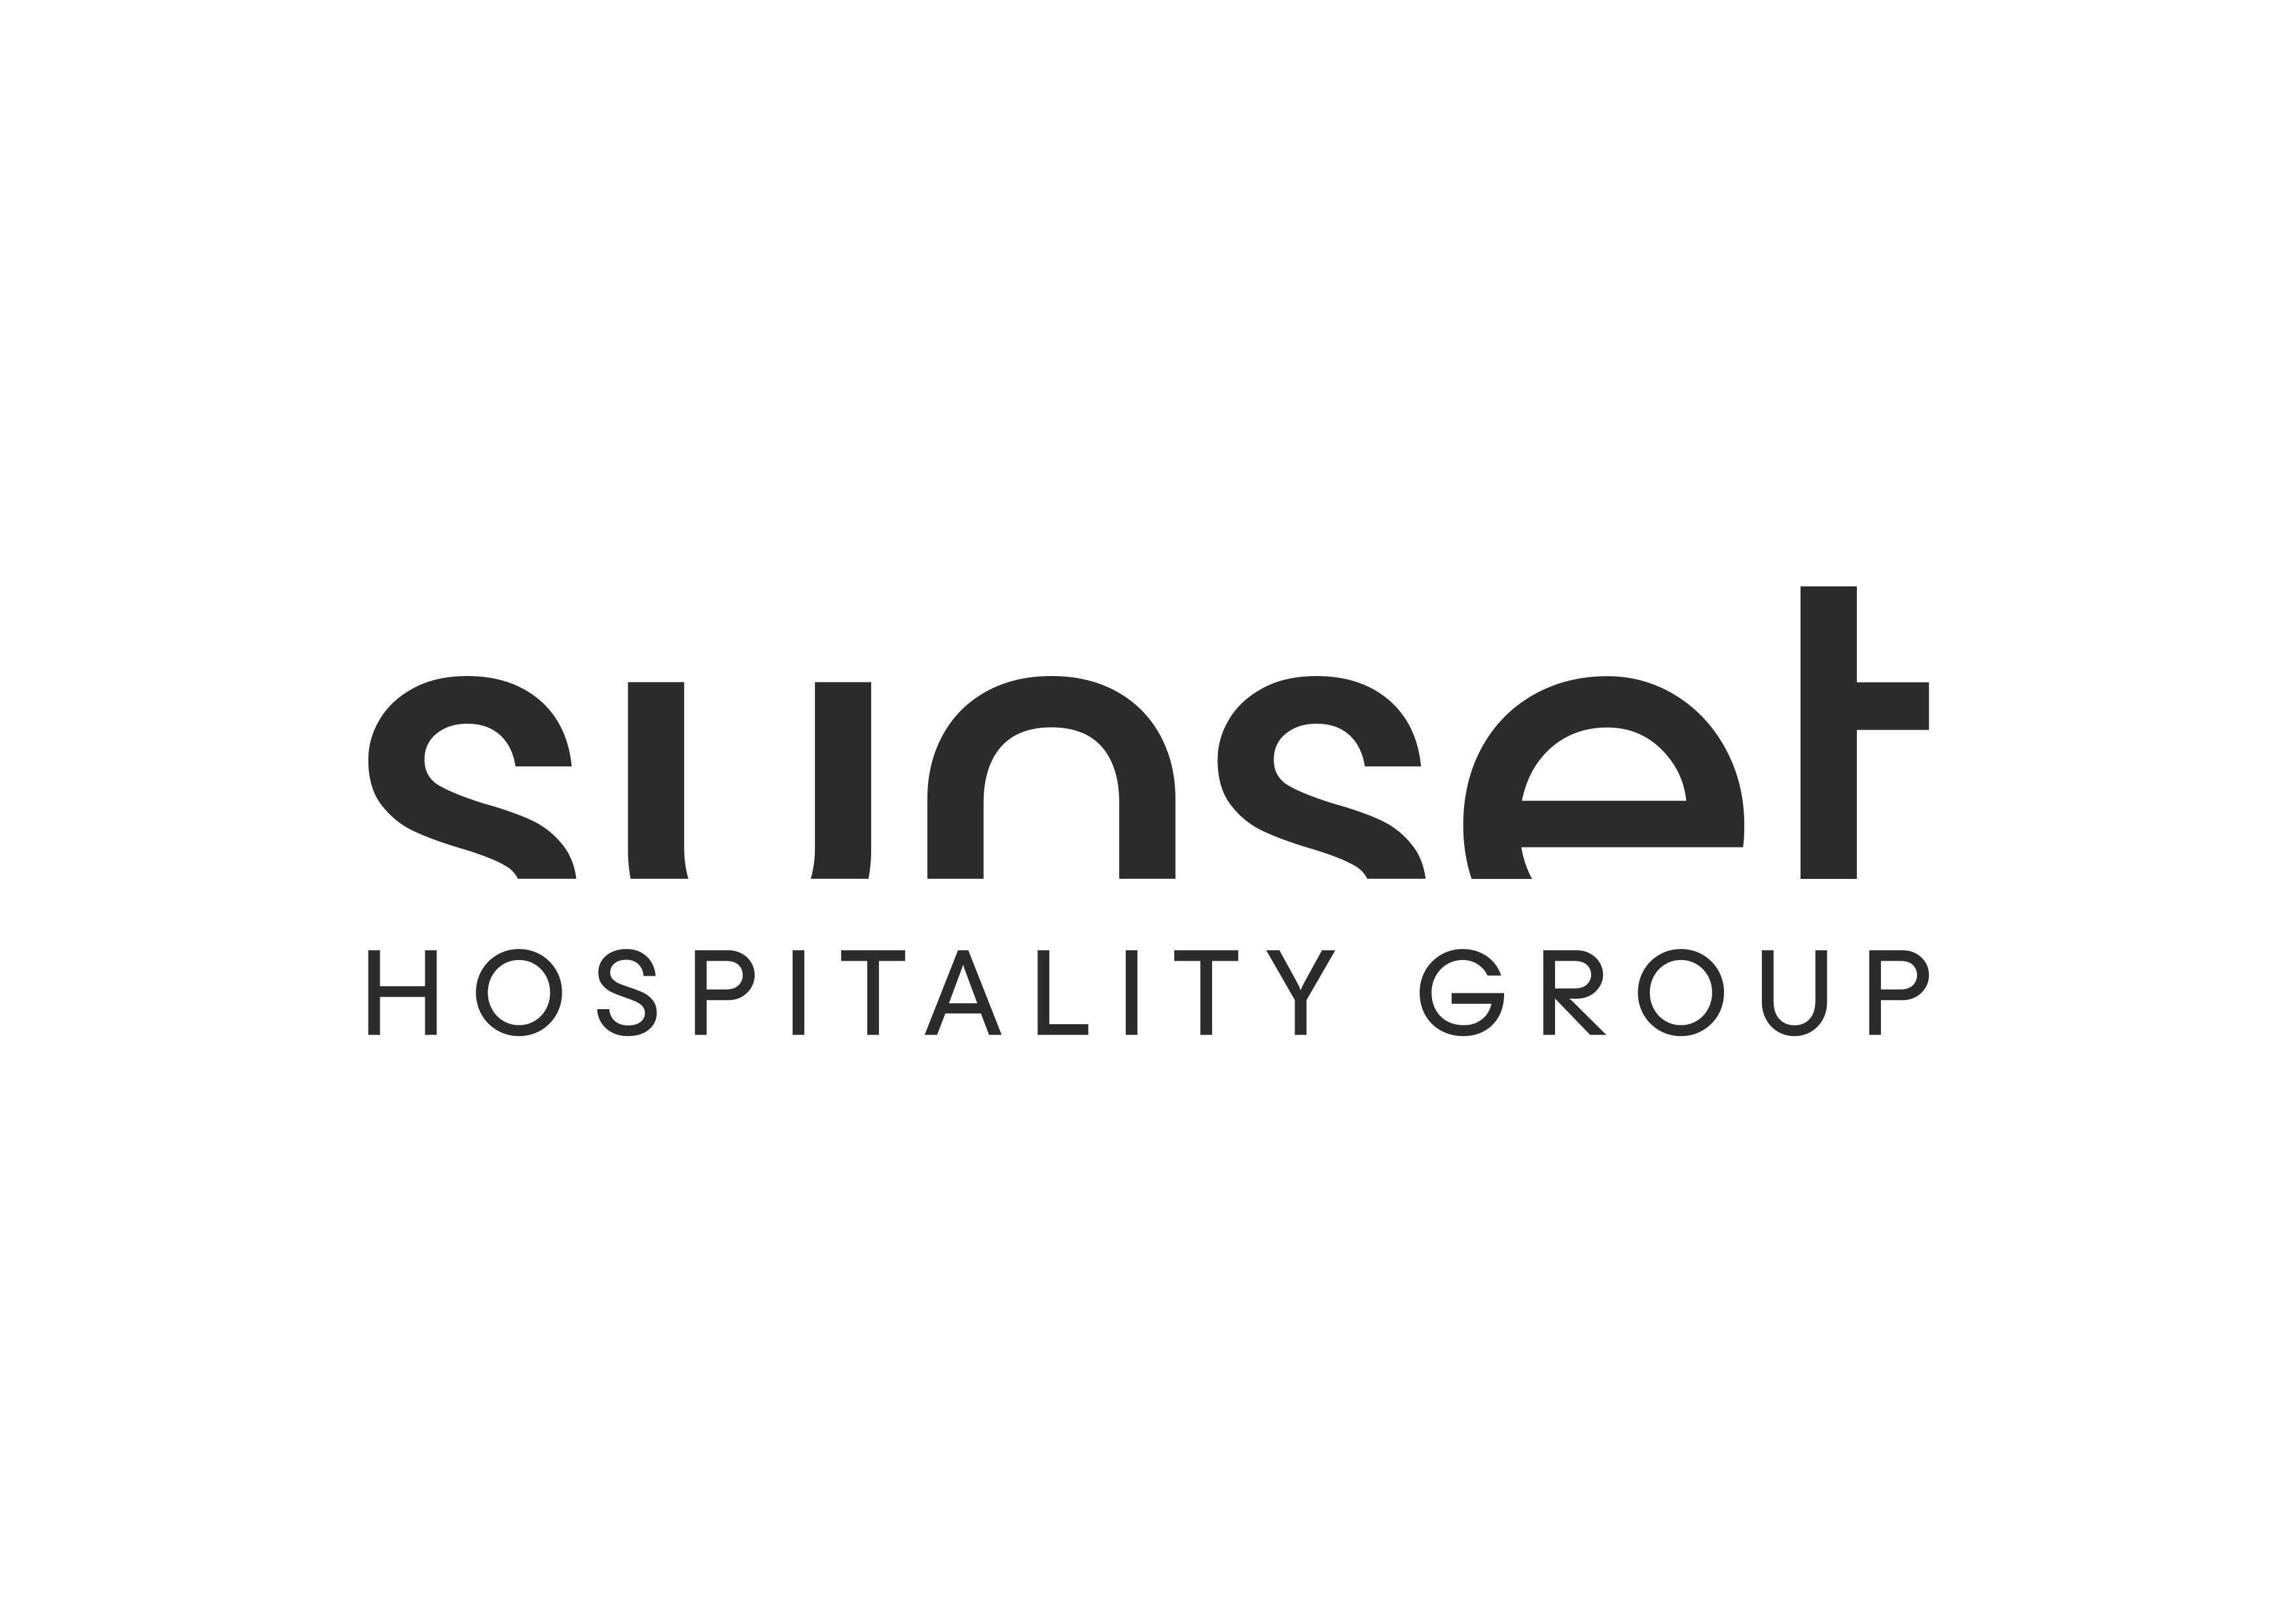 Sundown Hospitality Group is accelerating its world growth